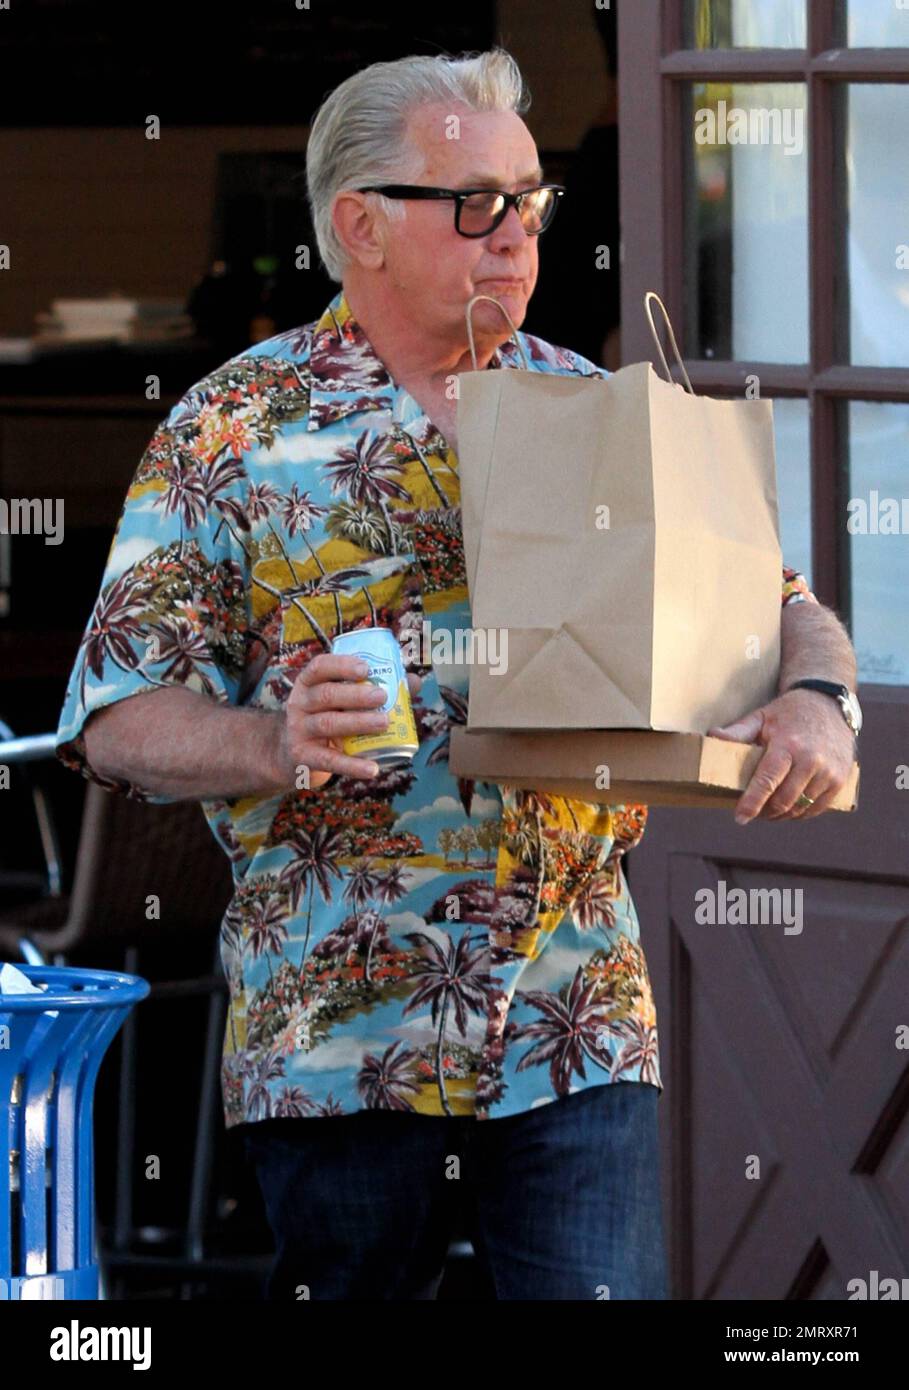 Actor Martin Sheen was seen picking up food to go from Howdy's restaurant in Malibu and driving off in his vehicle which displayed Obama and anti-war bumper stickers. Malibu, CA. 28th July 2012   . Stock Photo